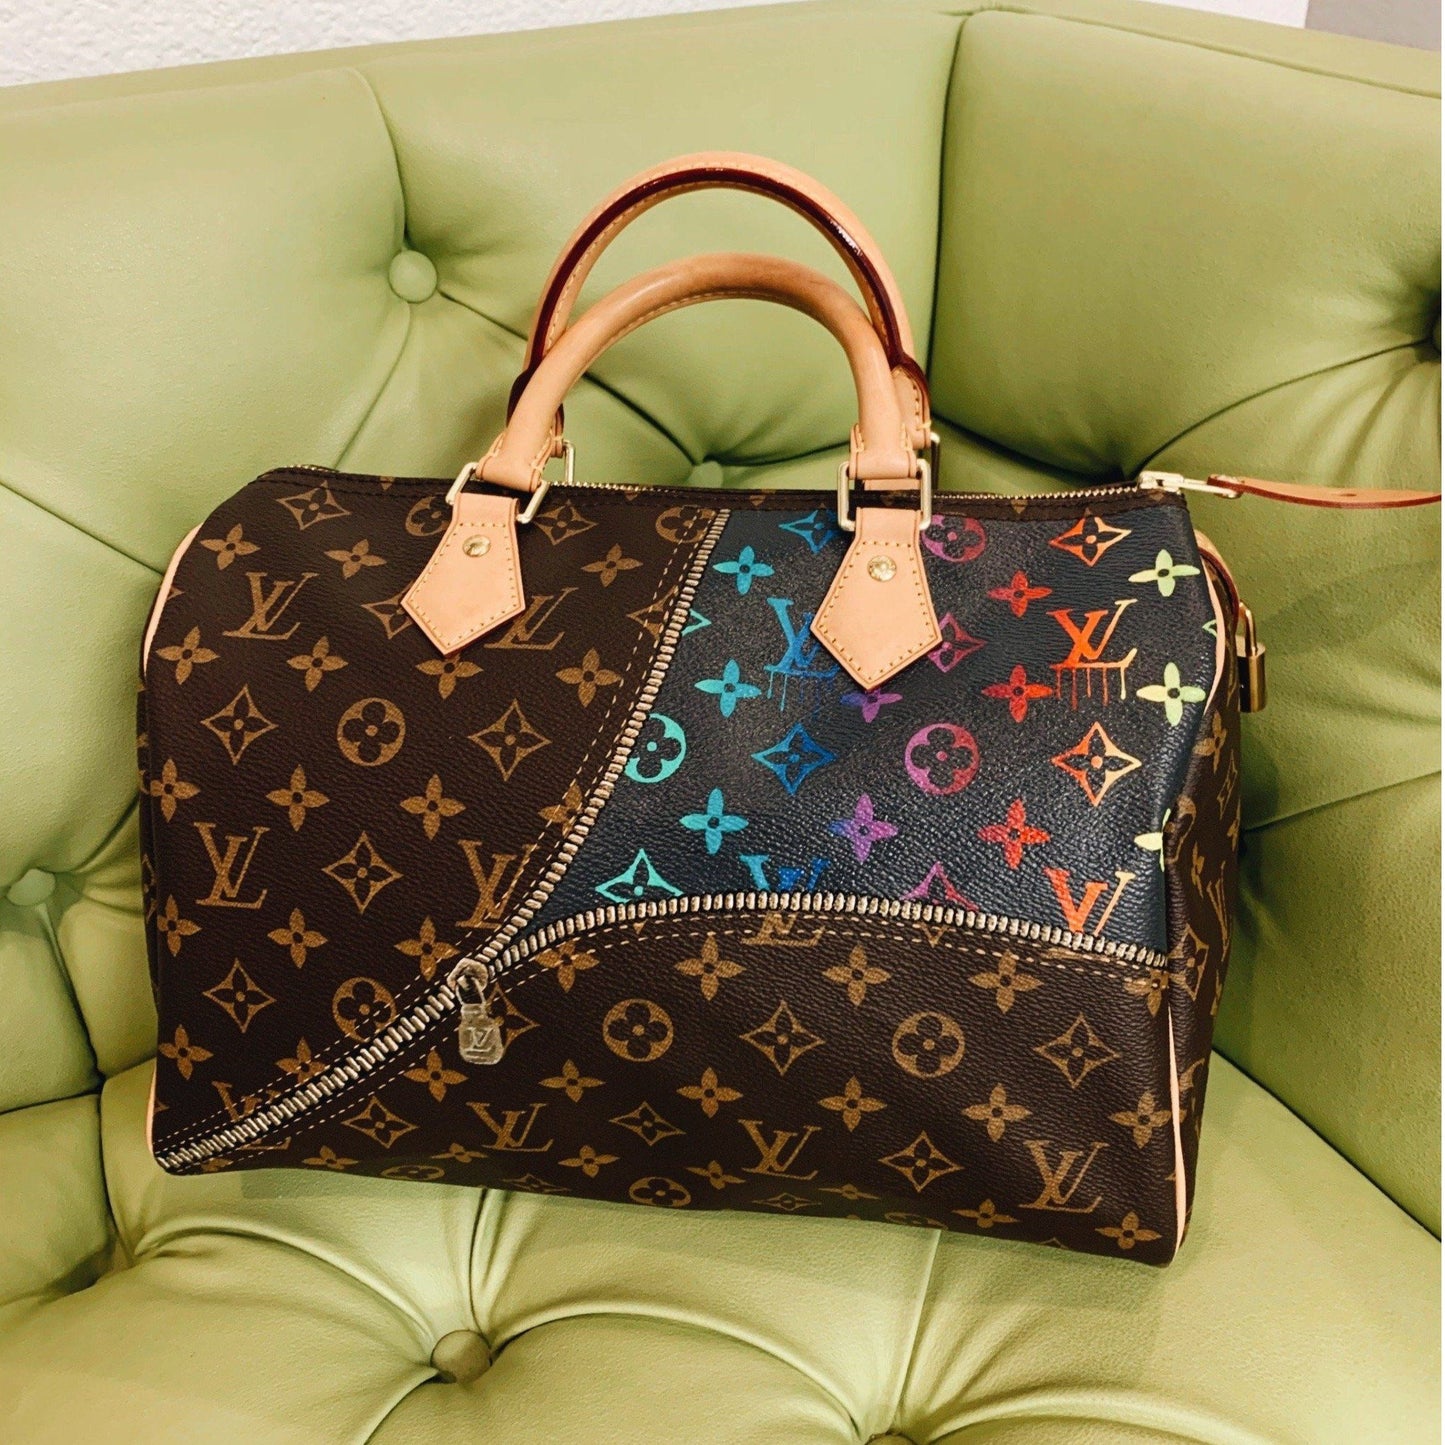 Unzipped Monogramed Gradients Artwork, Painted on a Louis Vuitton Speedy Bag by New Vintage